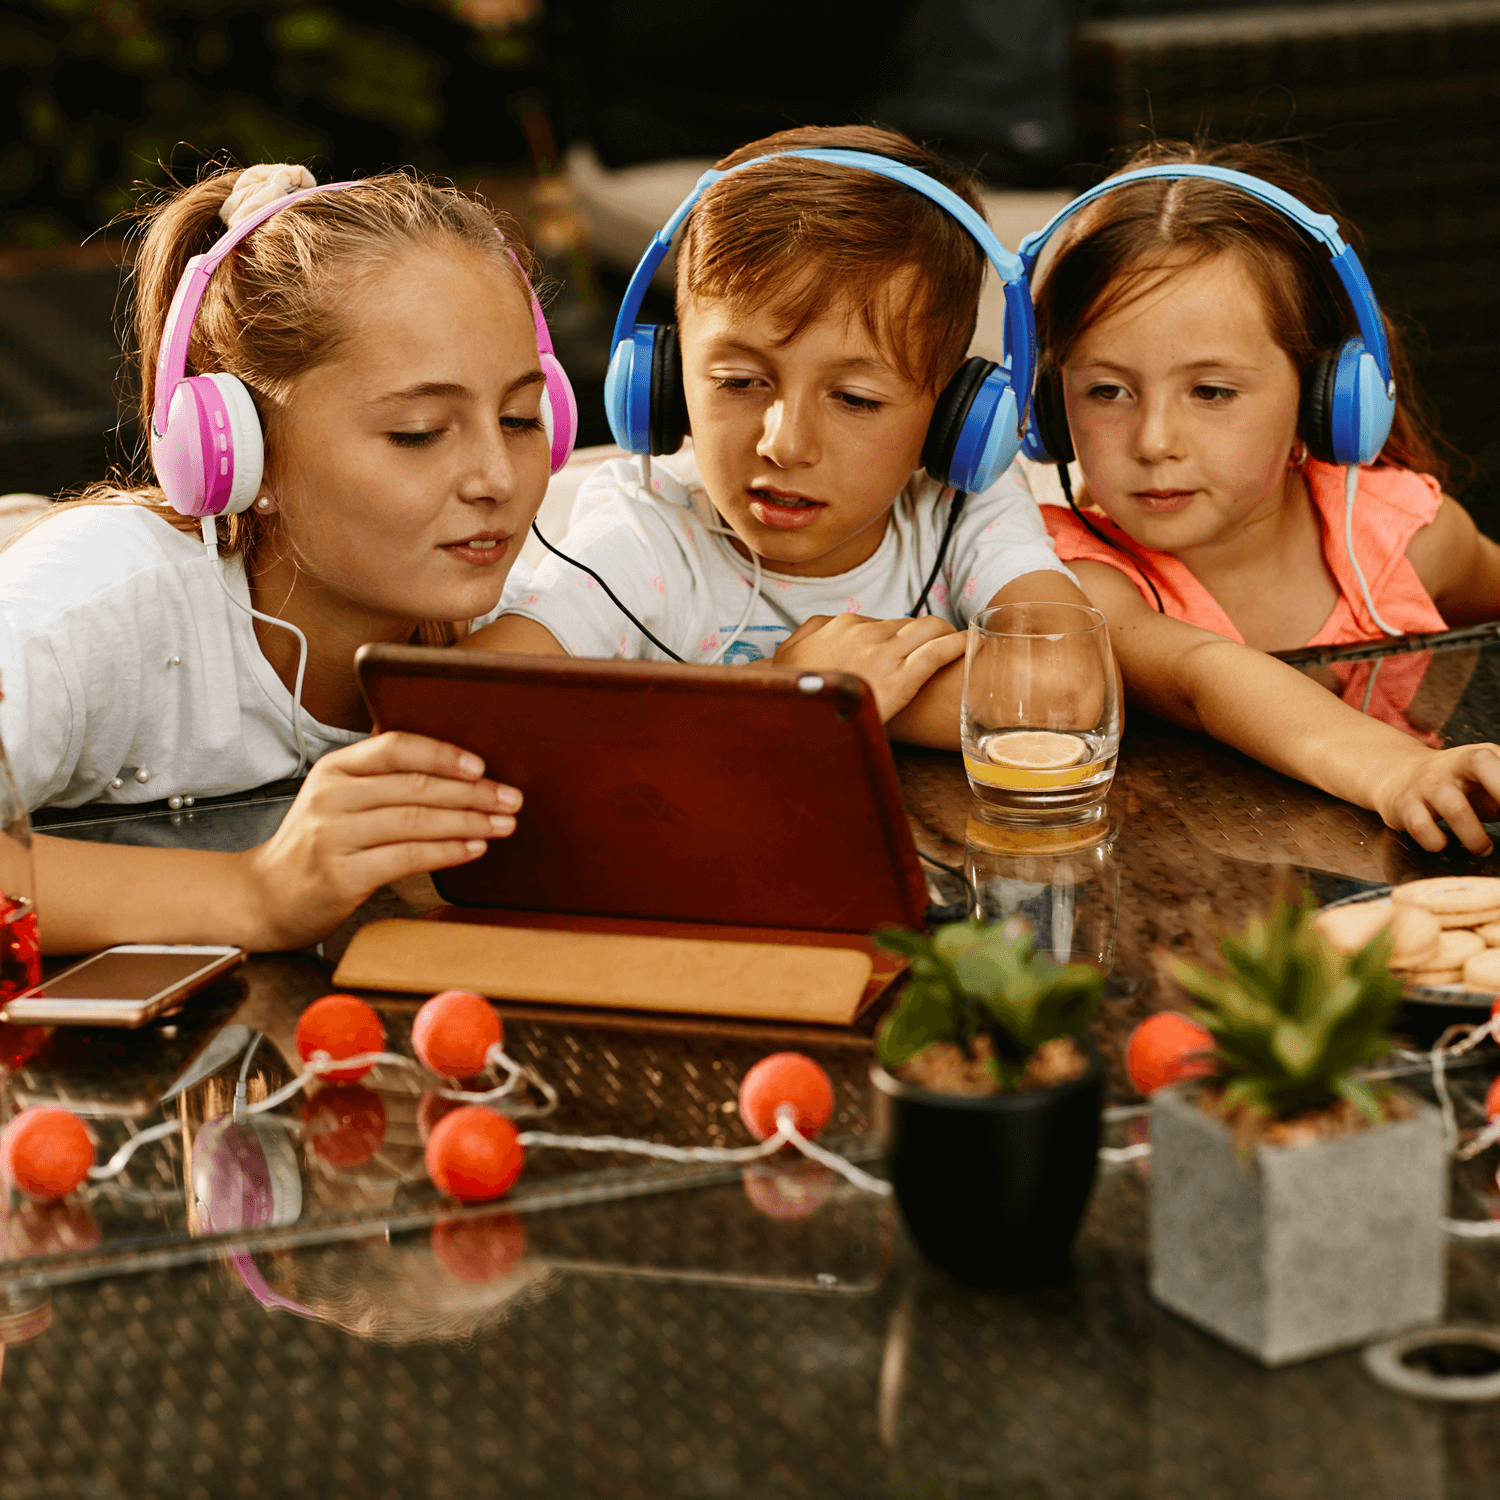 children viewing tablet using wireless headphones with sharing audio adapter